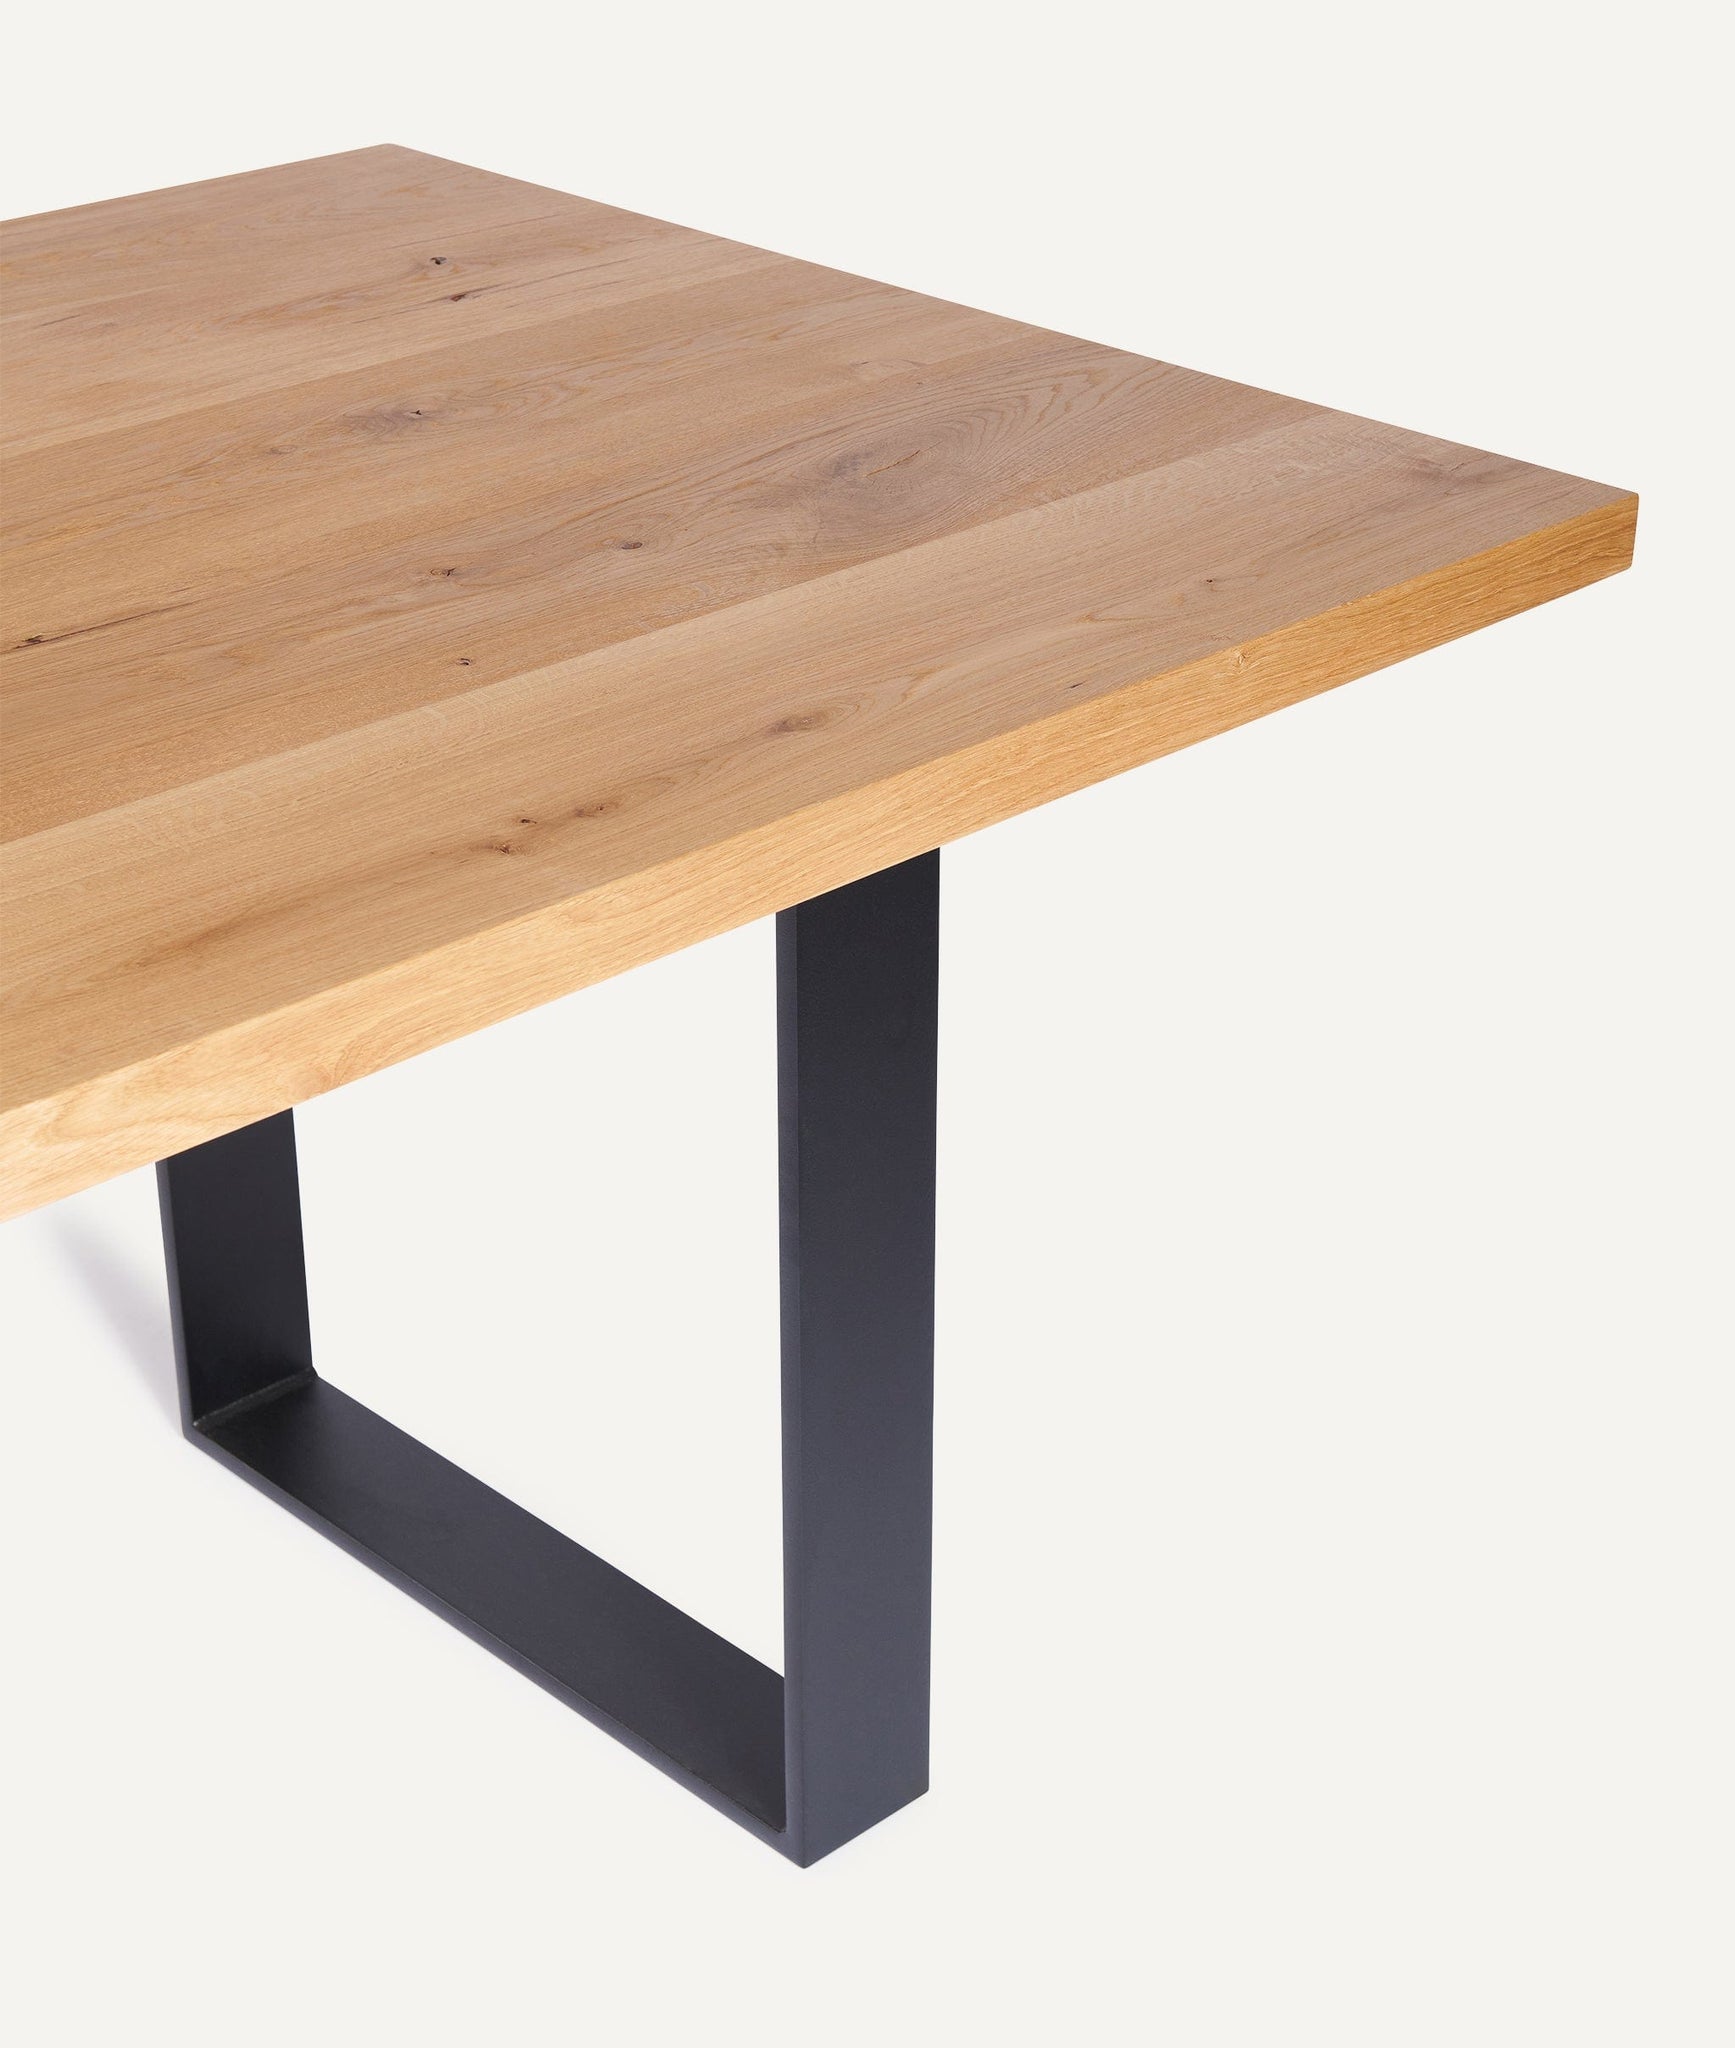 Solid Wood Table in European Oak (natural edge) with Flat Steel Frame